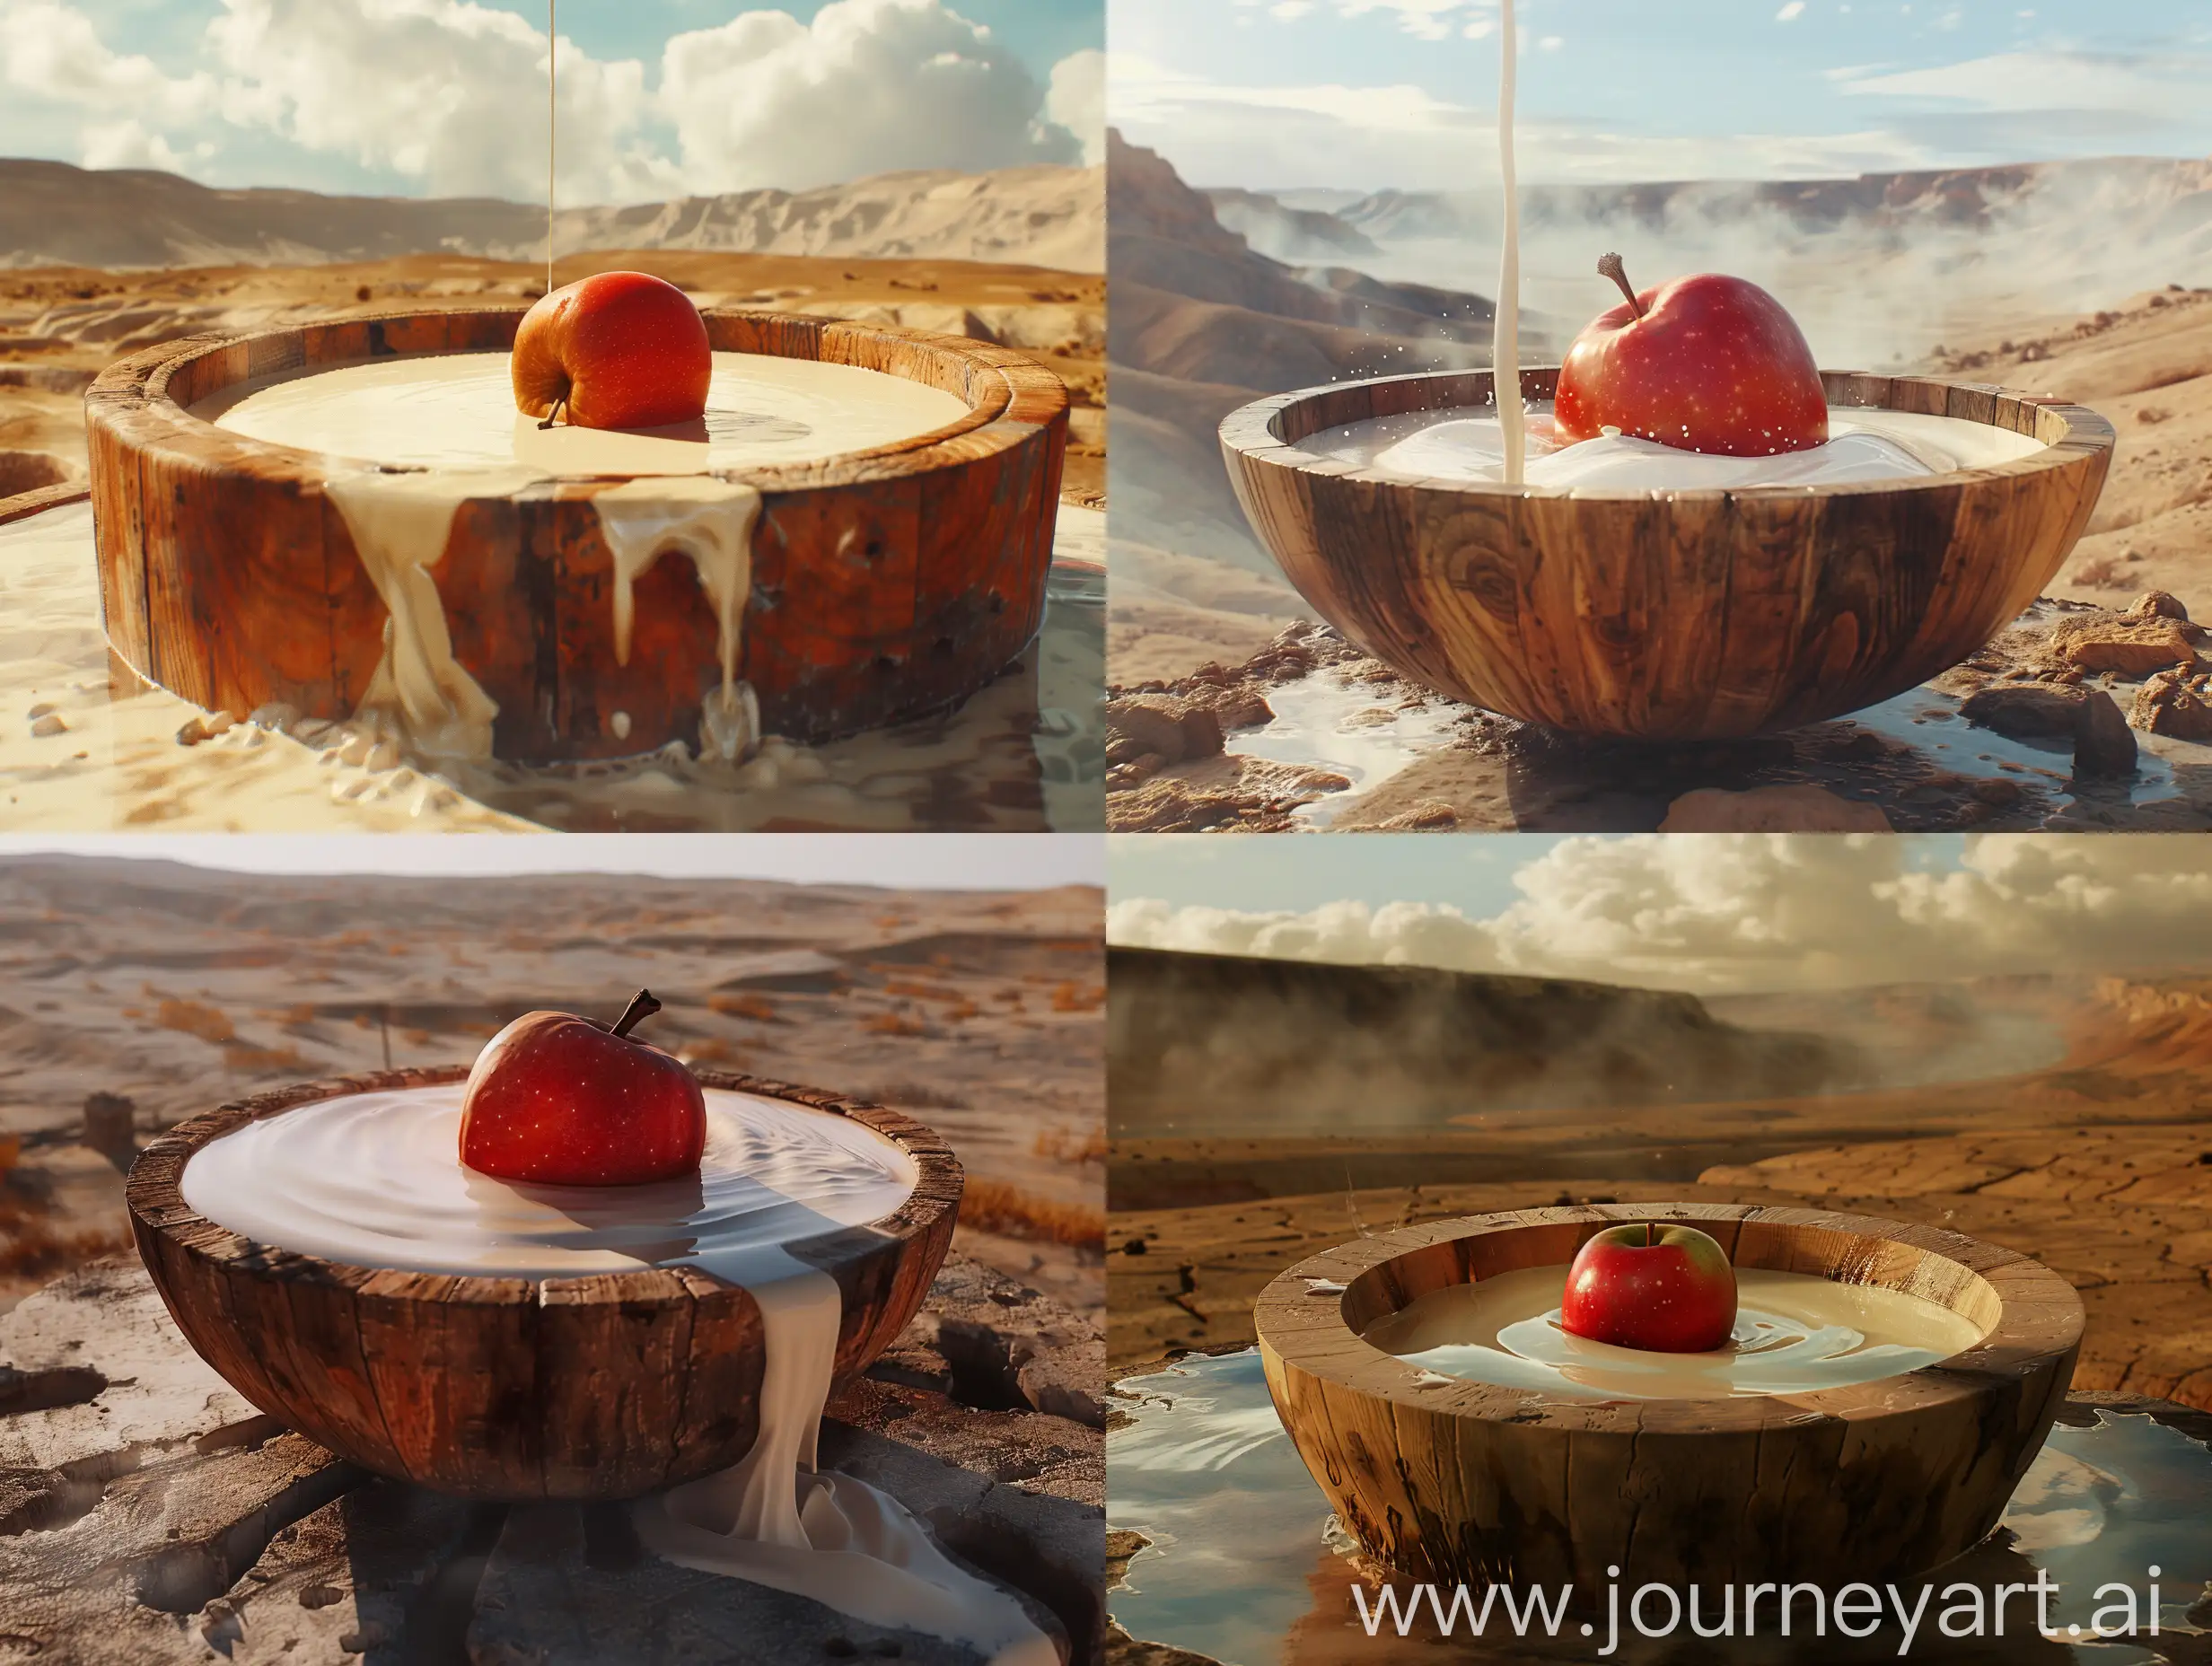 An apple the size of a watermelon fell into a large wooden bowl of milk and milk poured out, this bowl is in an old forge in the Persian Empire. in a desert, in an ancient civilization, cinematic, epic realism,8K, highly detailed, medium shot, upper body, glamour lighting